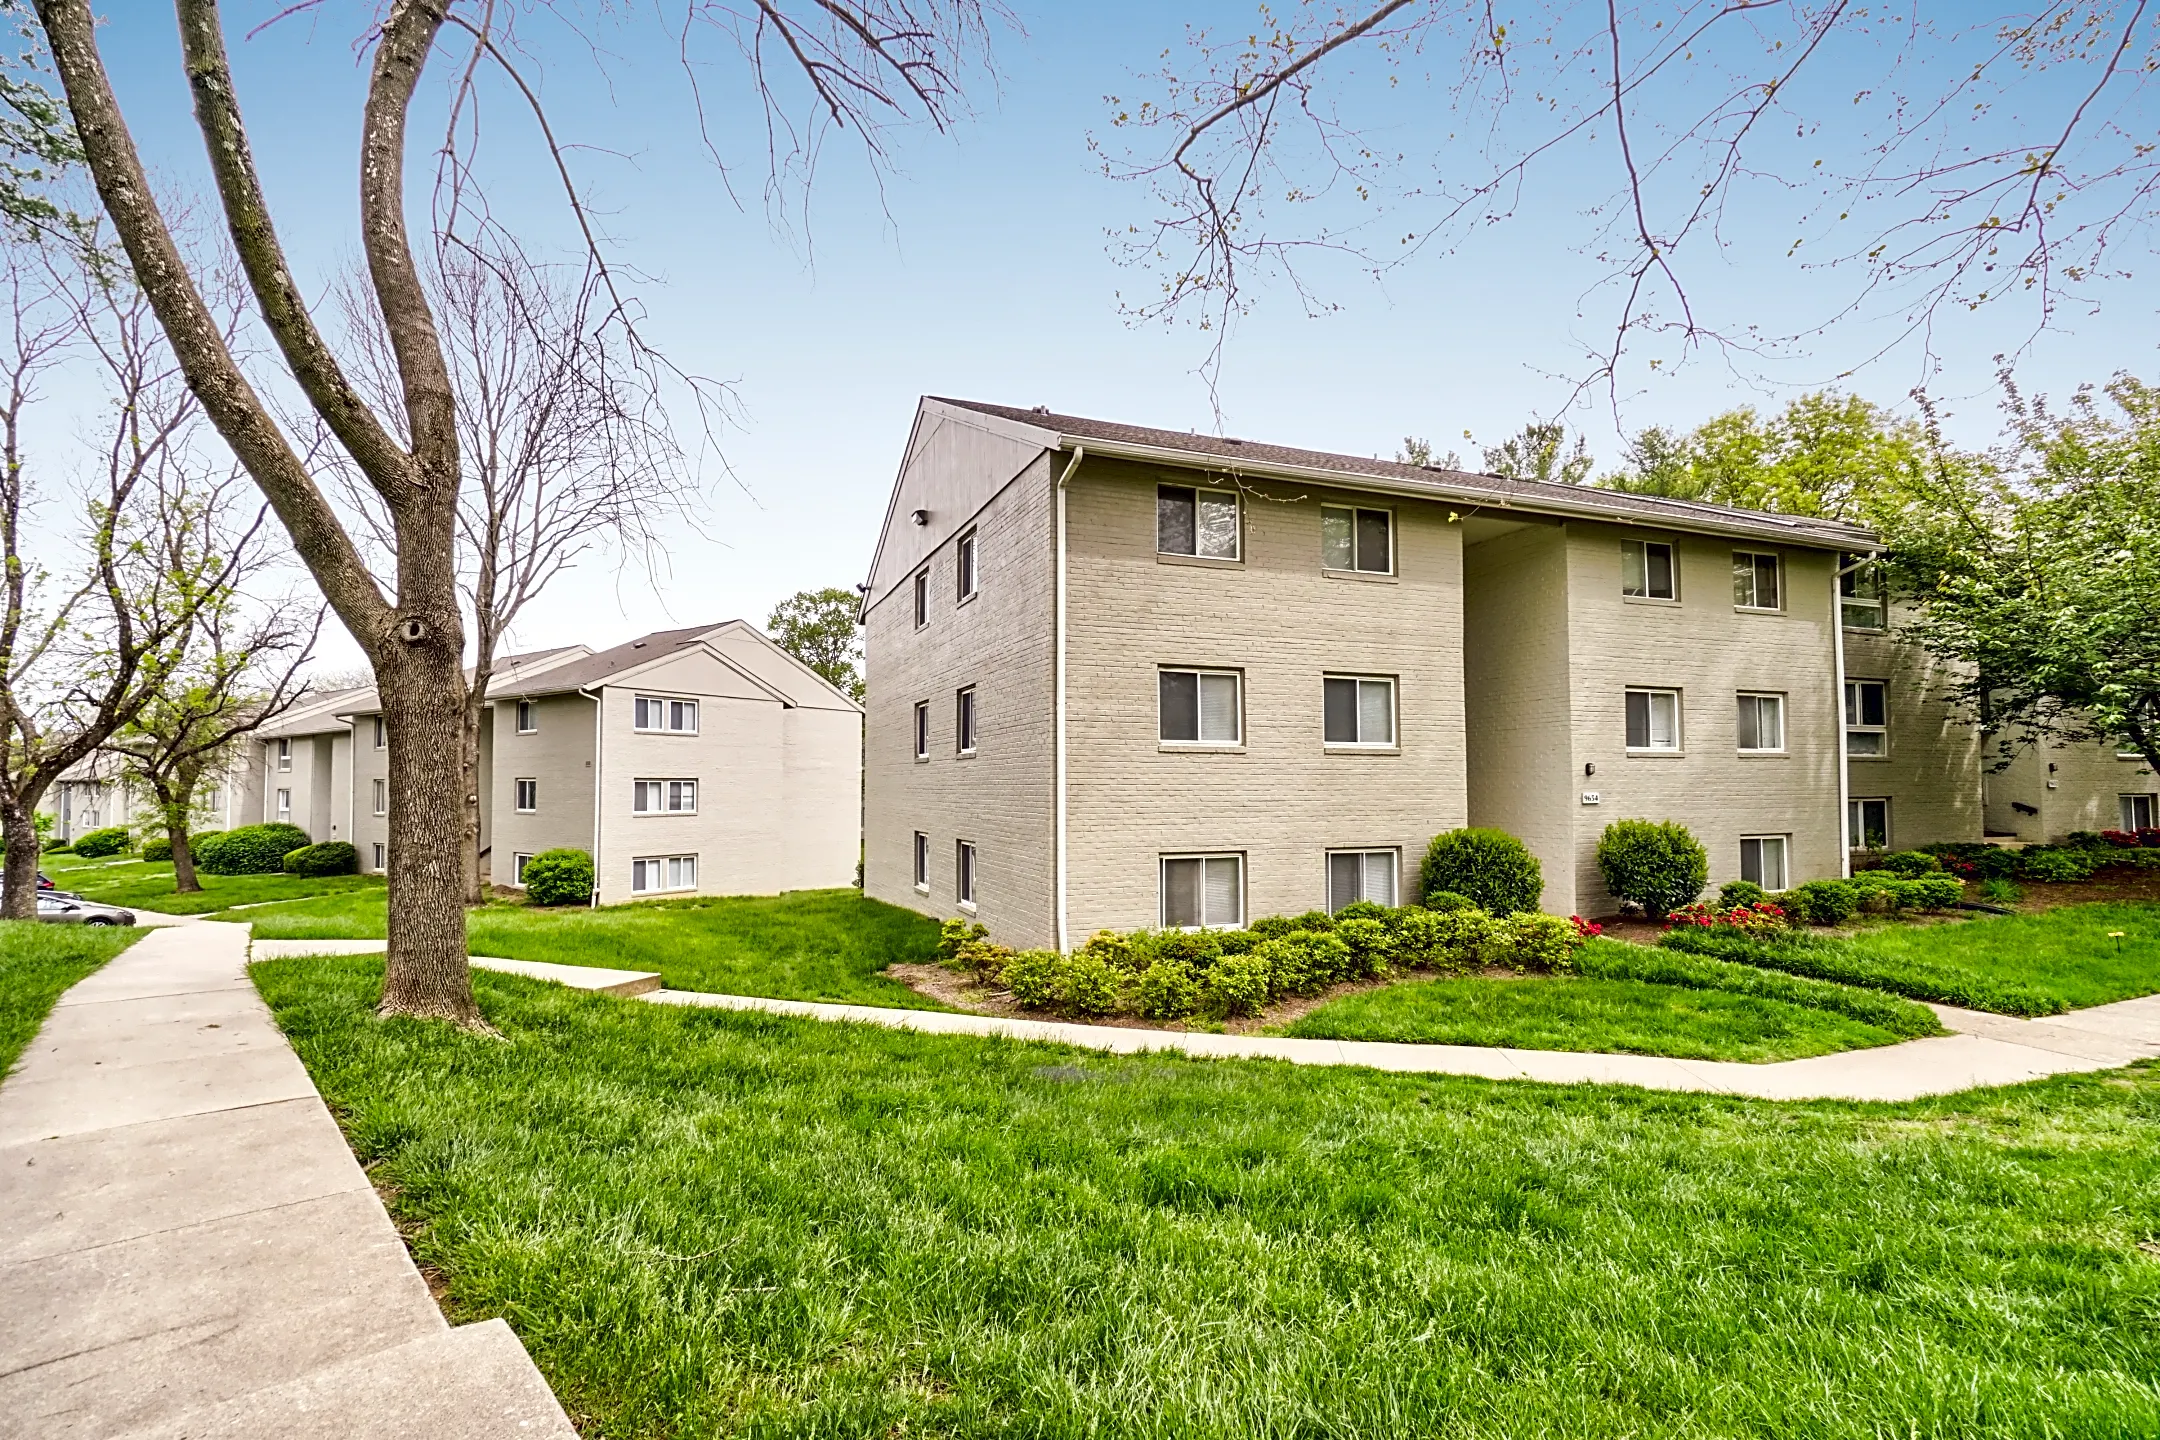 Building - The Verona at Oakland Mills - Columbia, MD